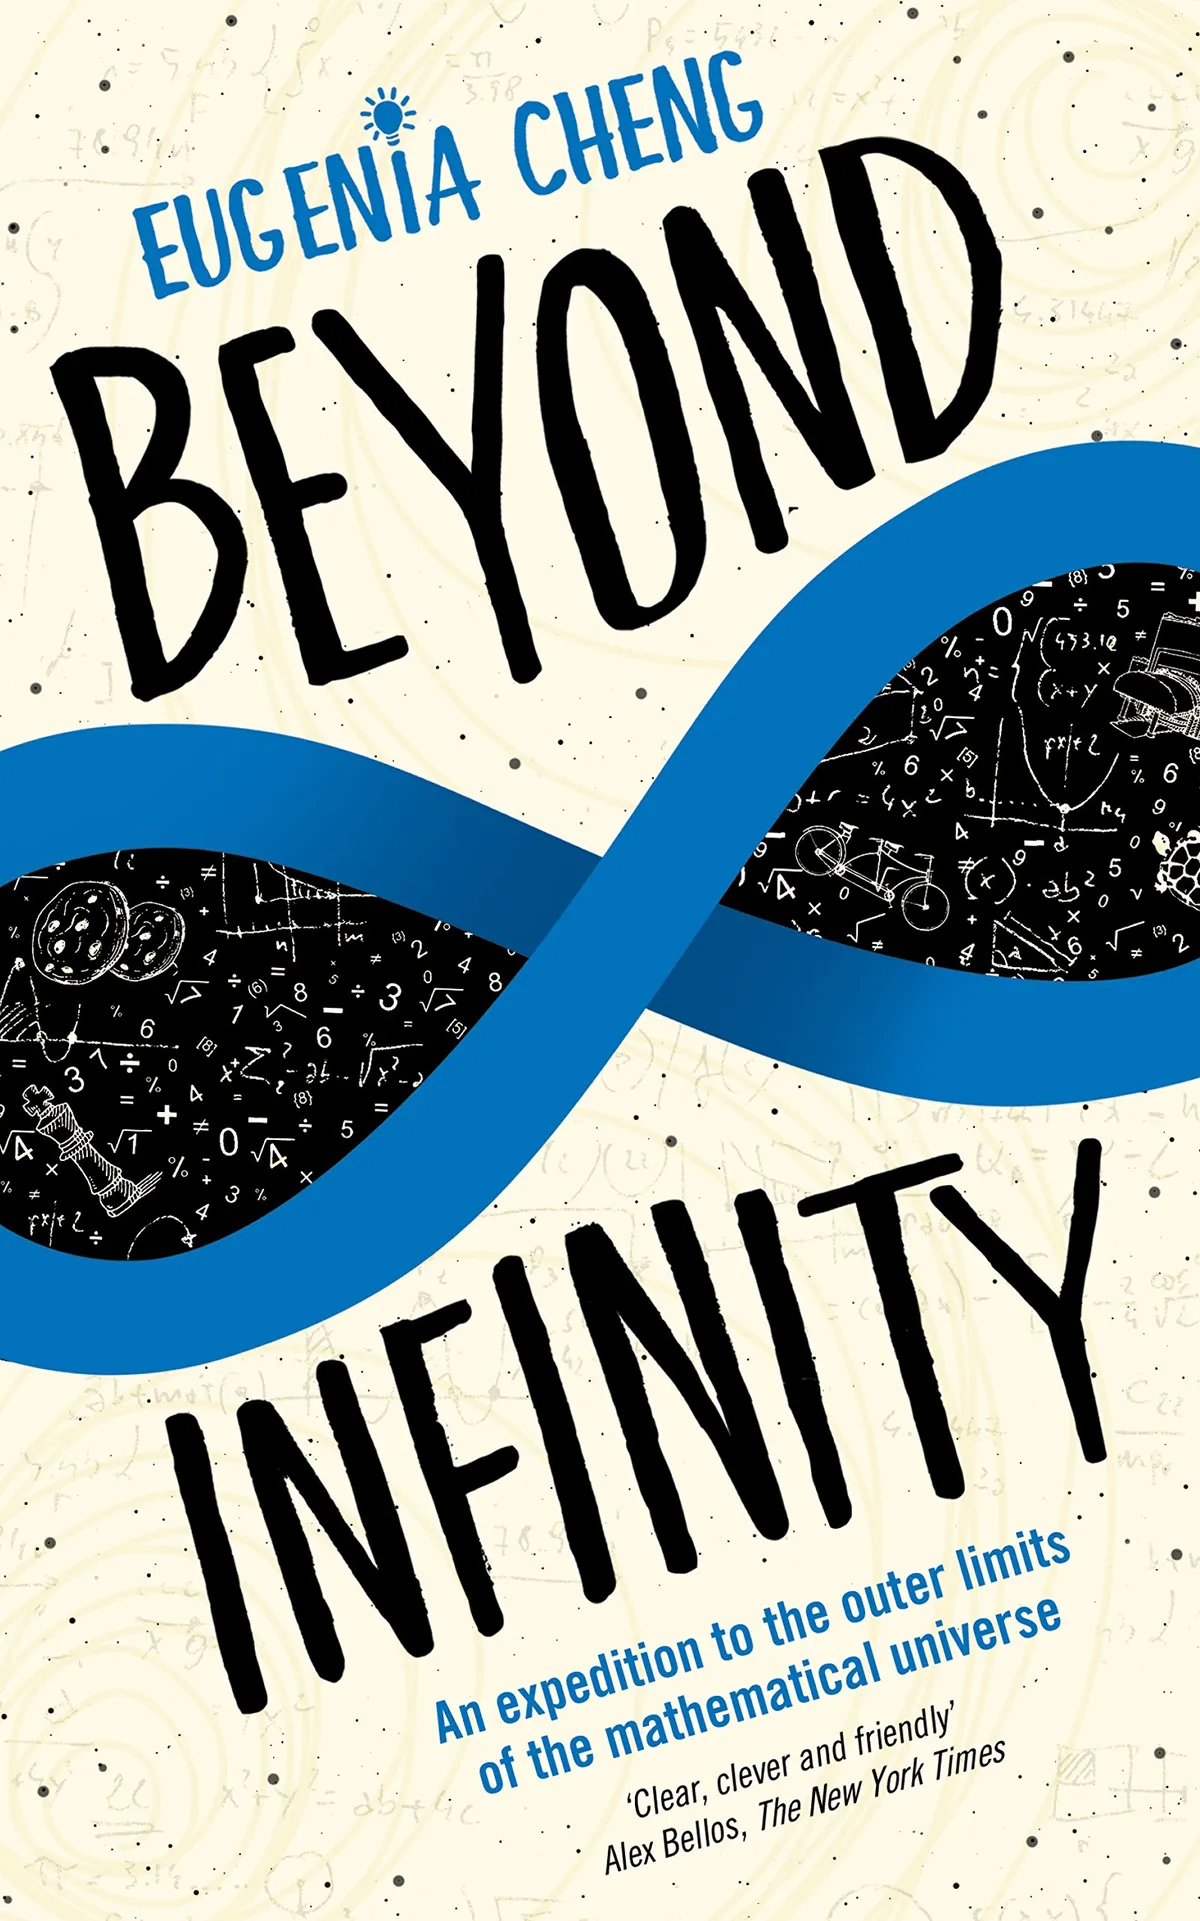 Beyond Infinity by Eugenia Cheng is available from 14 March (Profile Books, £12.99)